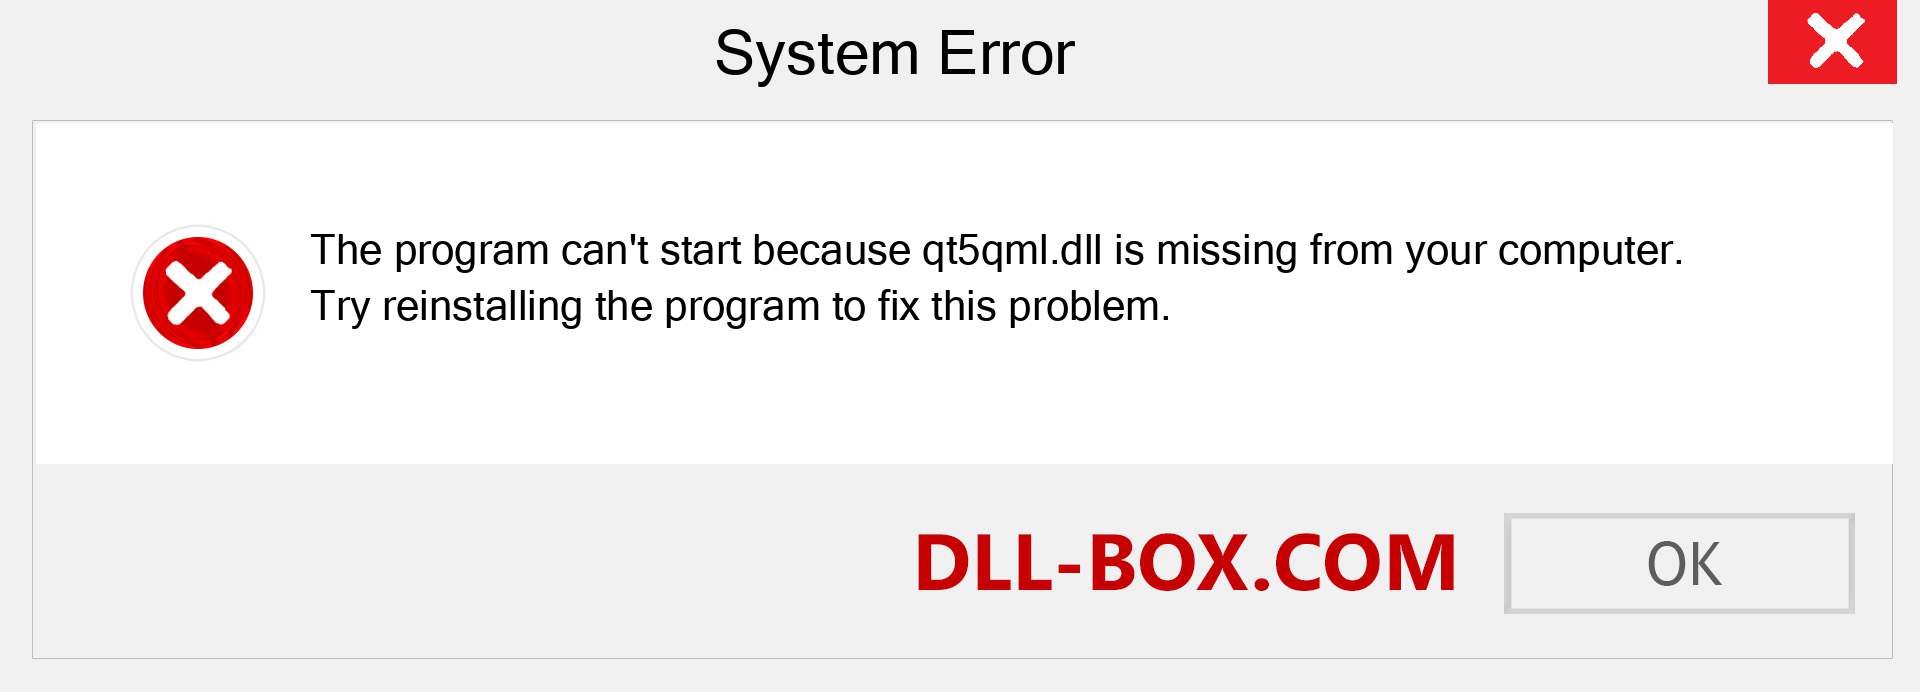  qt5qml.dll file is missing?. Download for Windows 7, 8, 10 - Fix  qt5qml dll Missing Error on Windows, photos, images